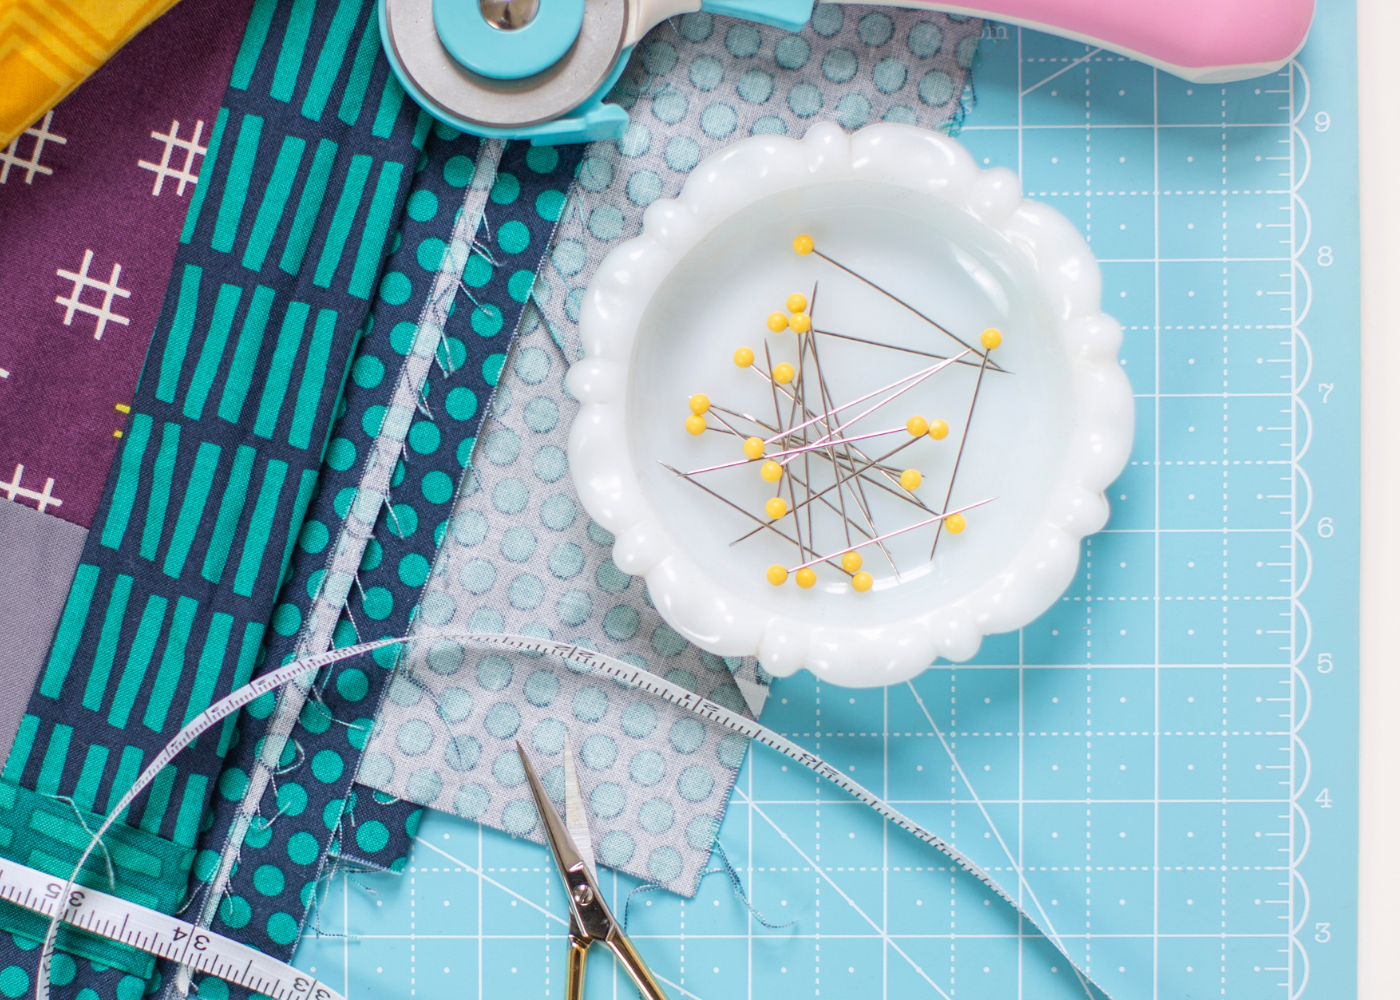 The Basic Sewing Supplies for Beginners